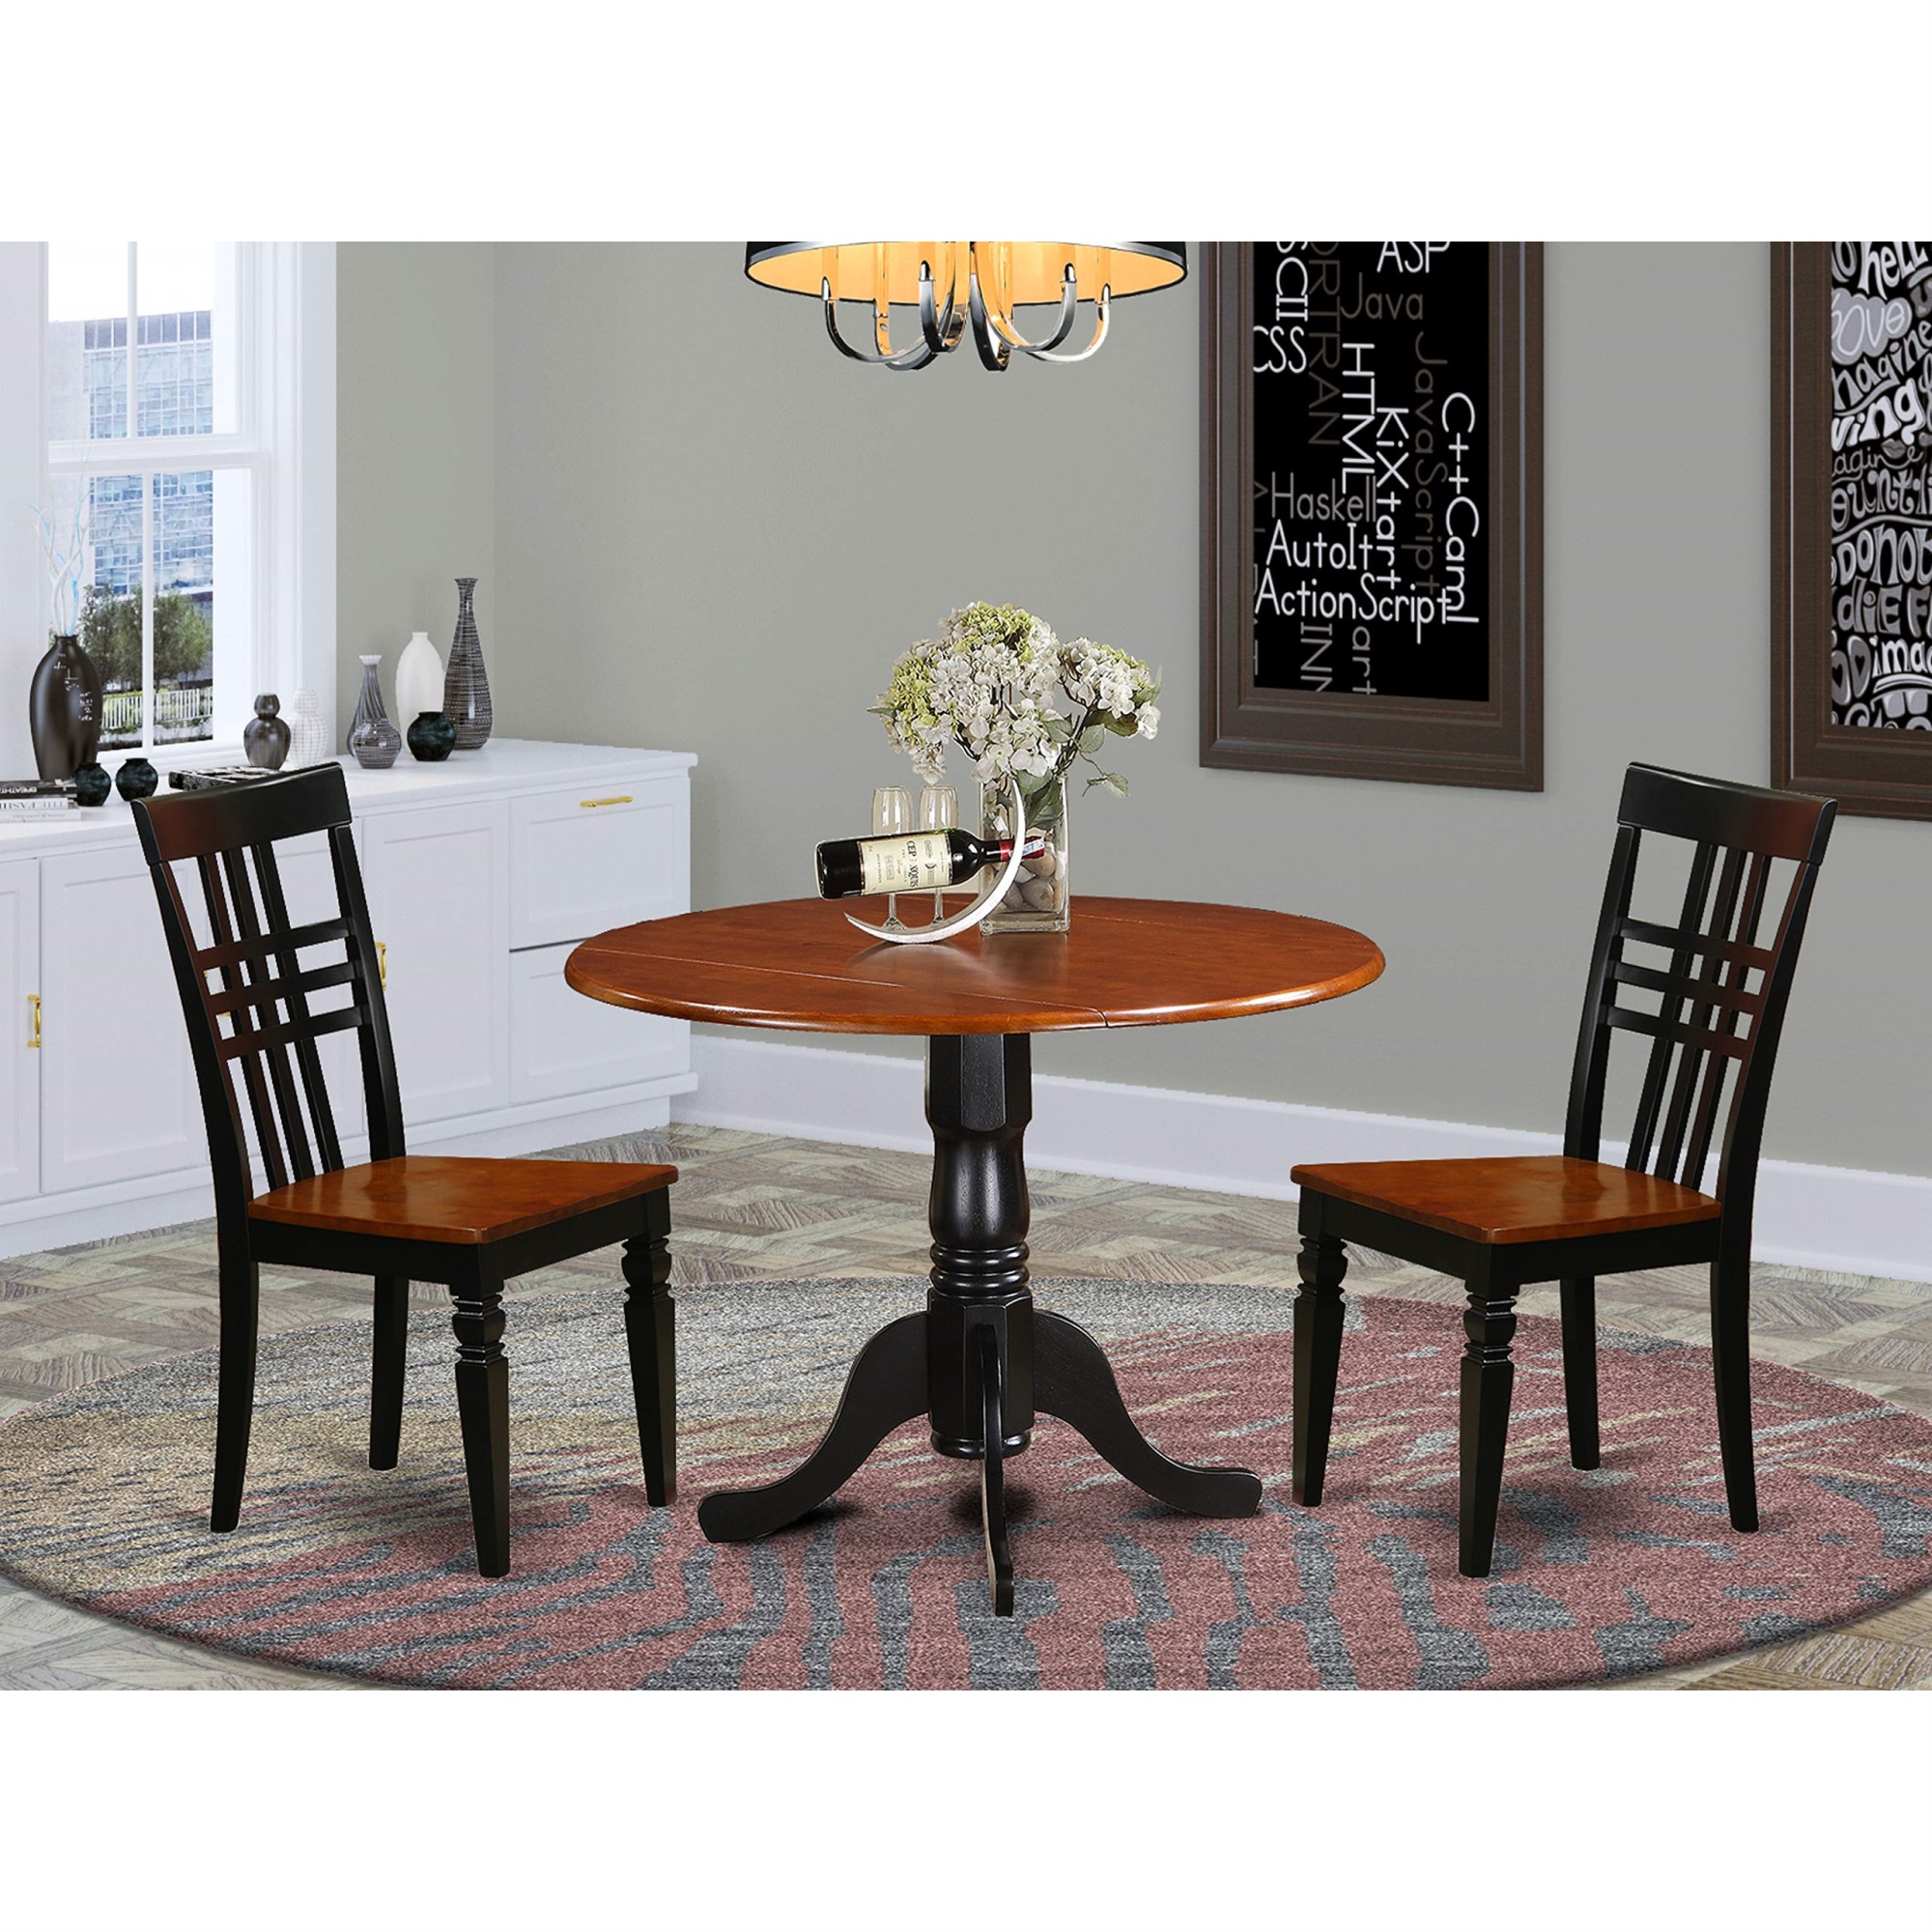 East West Furniture DLLG3-BCH-W 3 Pc Dining room set with a Dining Table and 2 Kitchen Chairs in Black and Cherry